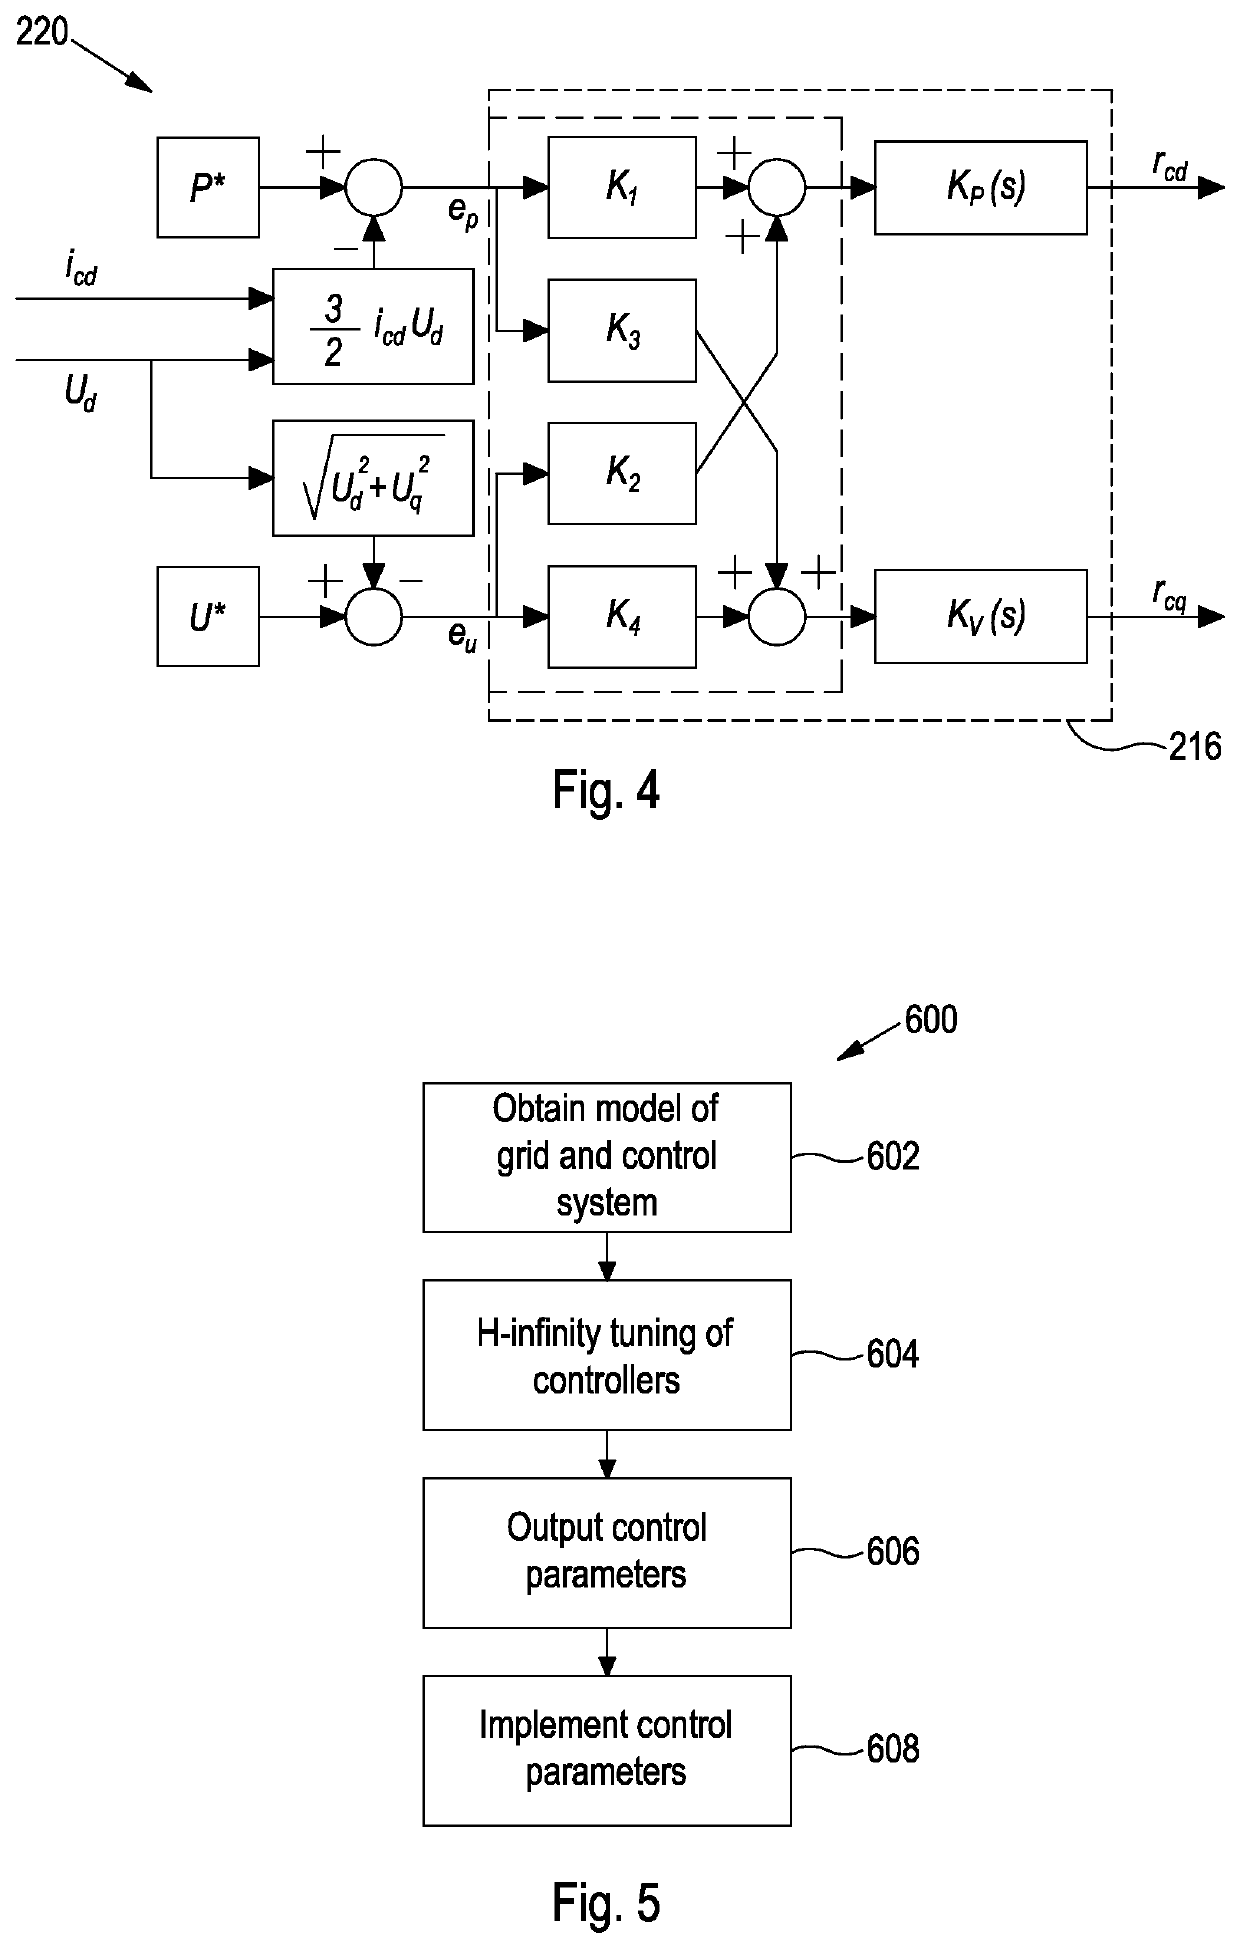 Apparatus and Methods for Providing Electrical Converter Control Parameters Based on the Minimisation of the H-Infinity Norm